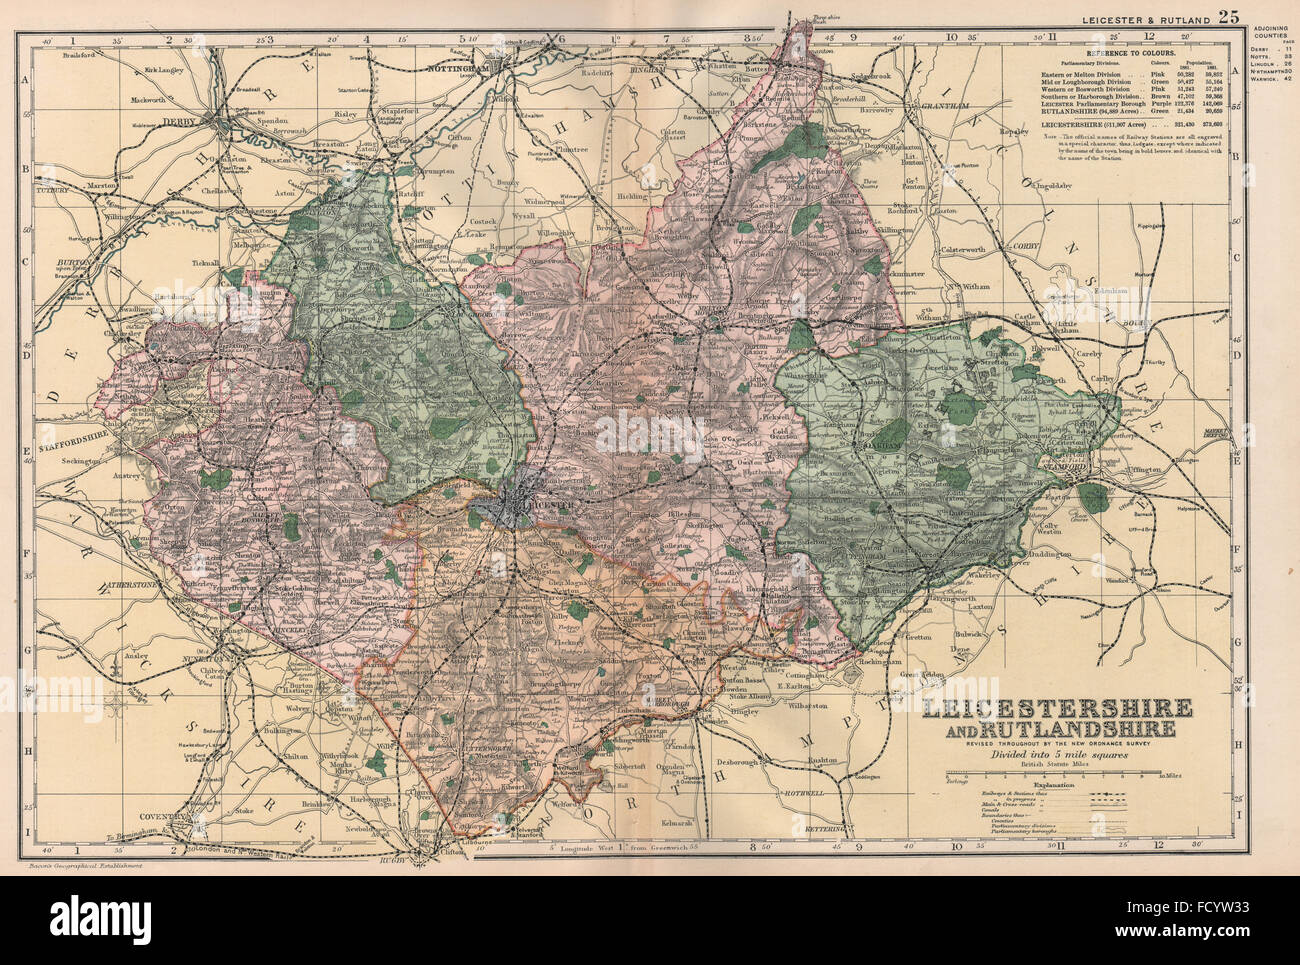 LEICESTERSHIRE AND RUTLANDSHIRE: Parliamentary divisions & parks. BACON 1896 map Stock Photo